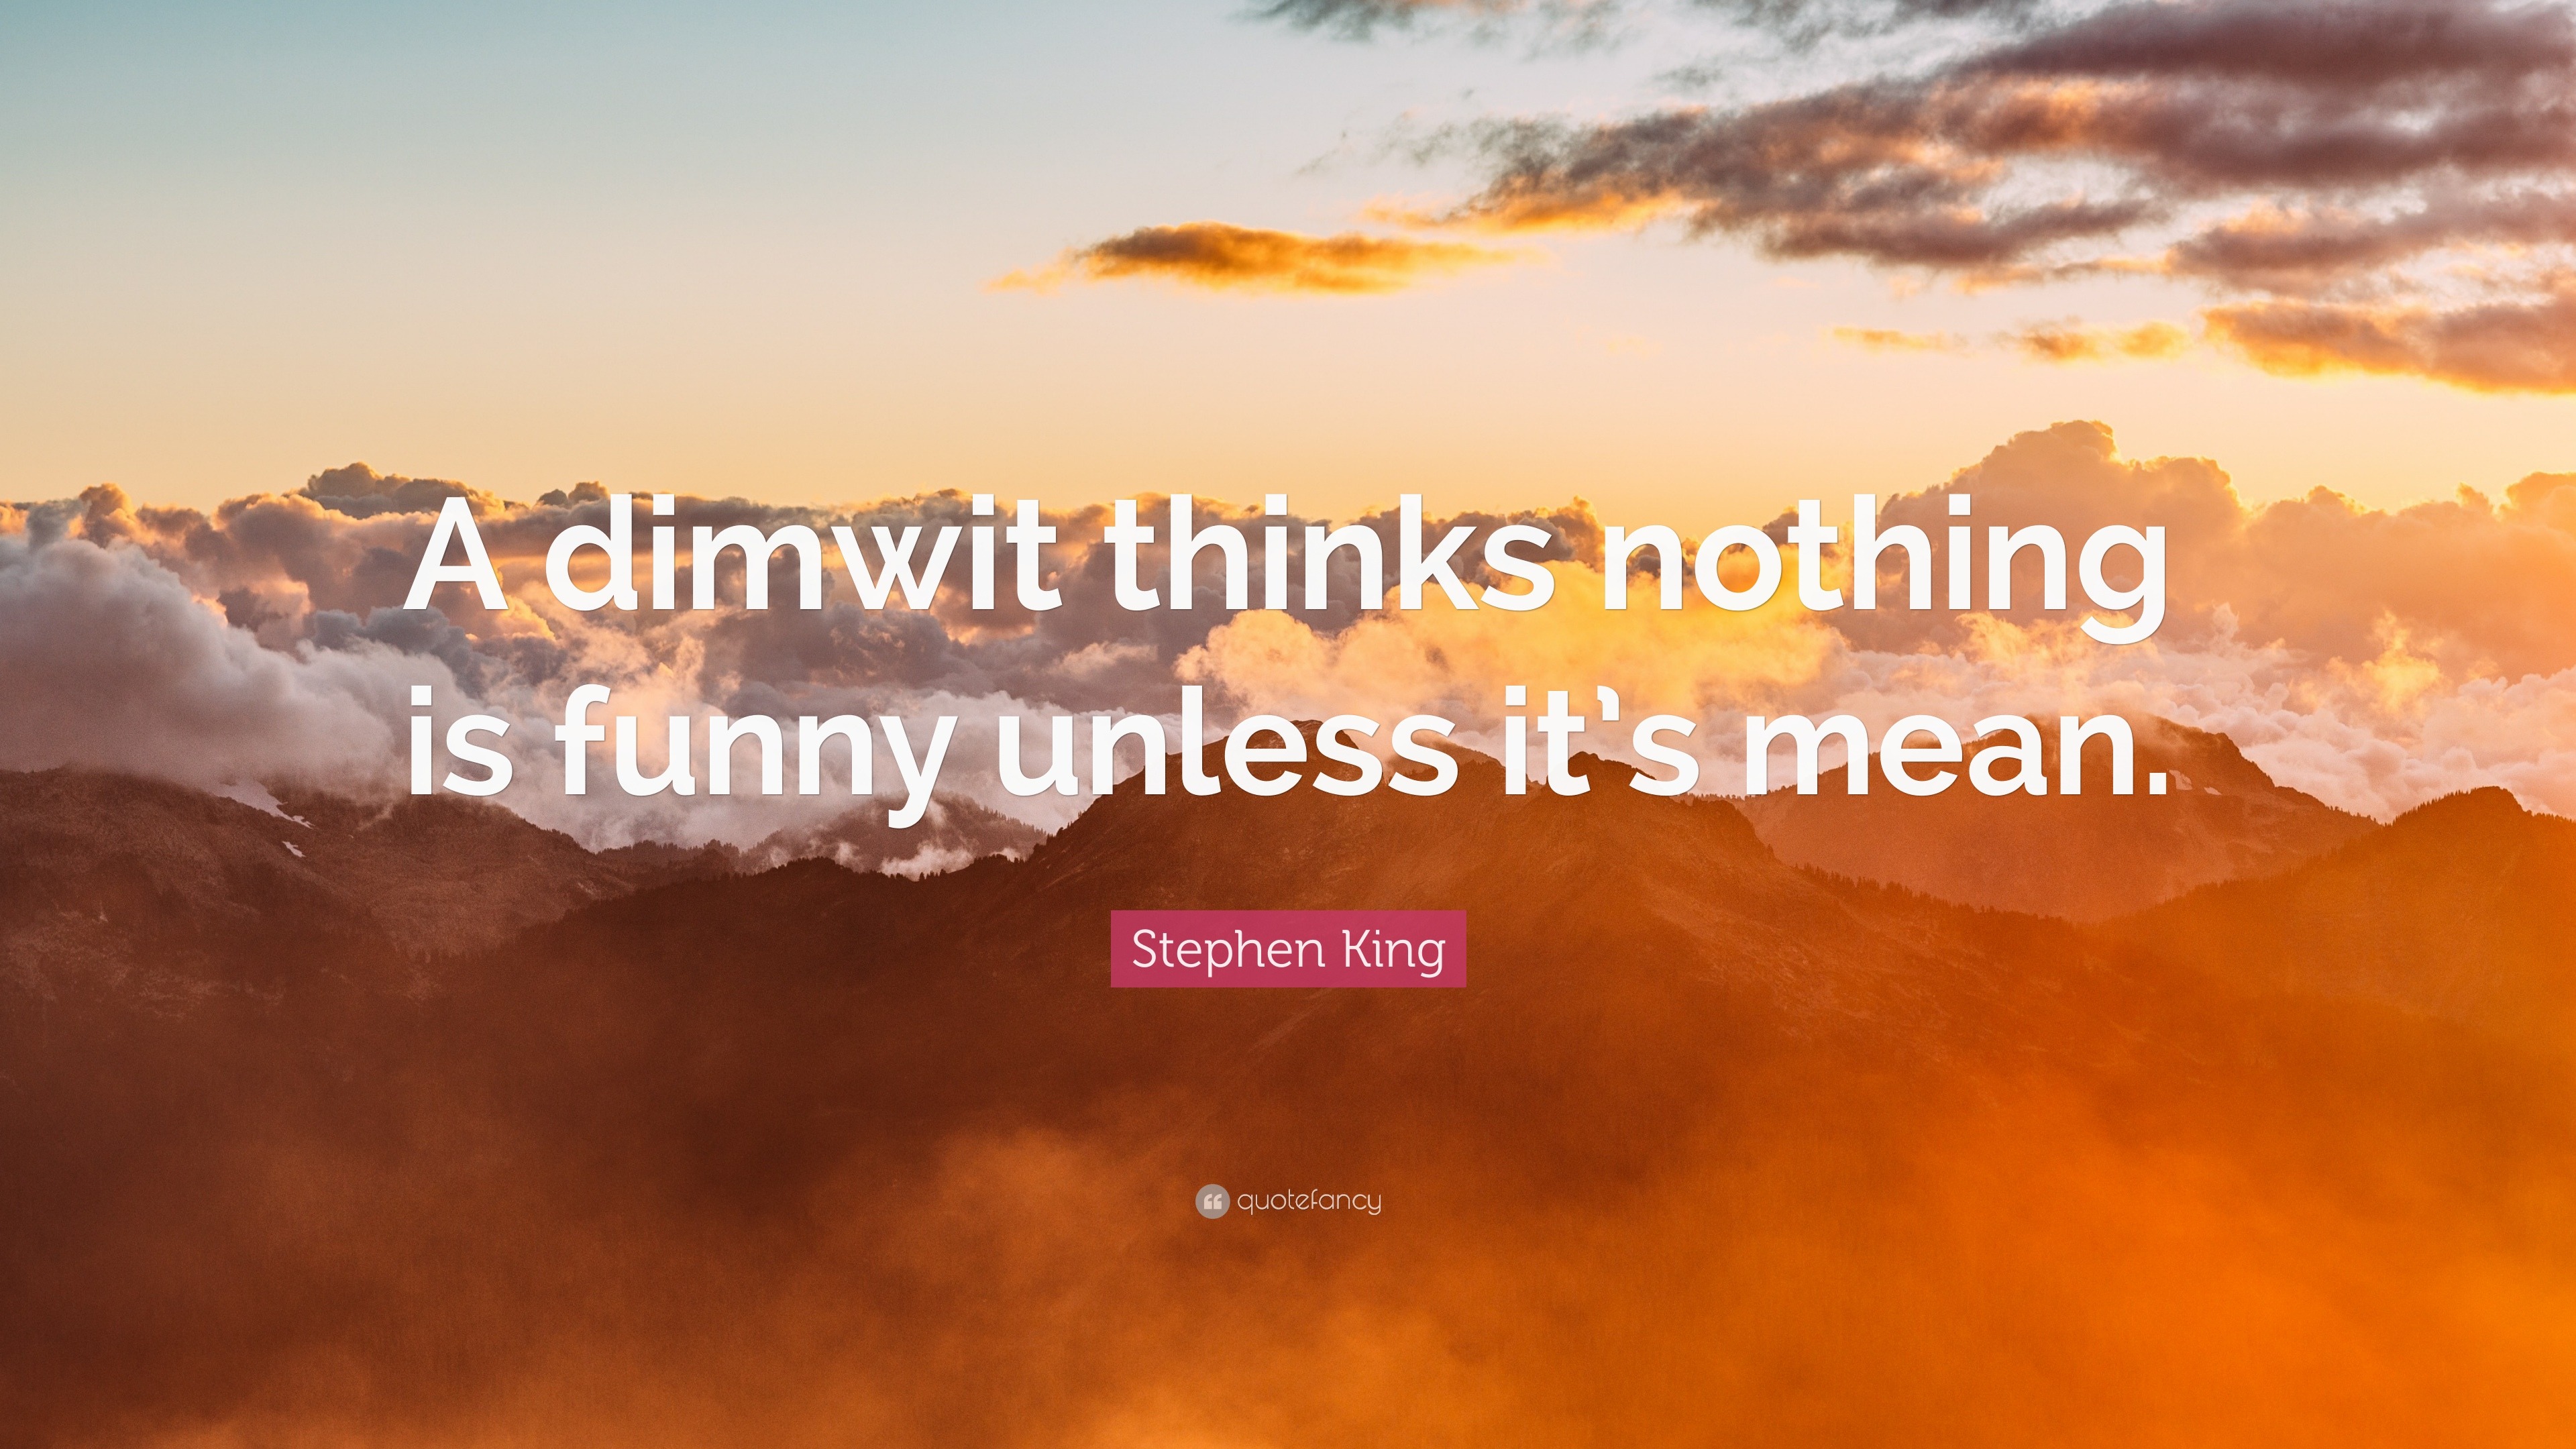 Stephen King Quote: “A dimwit thinks nothing is funny unless it's mean.”